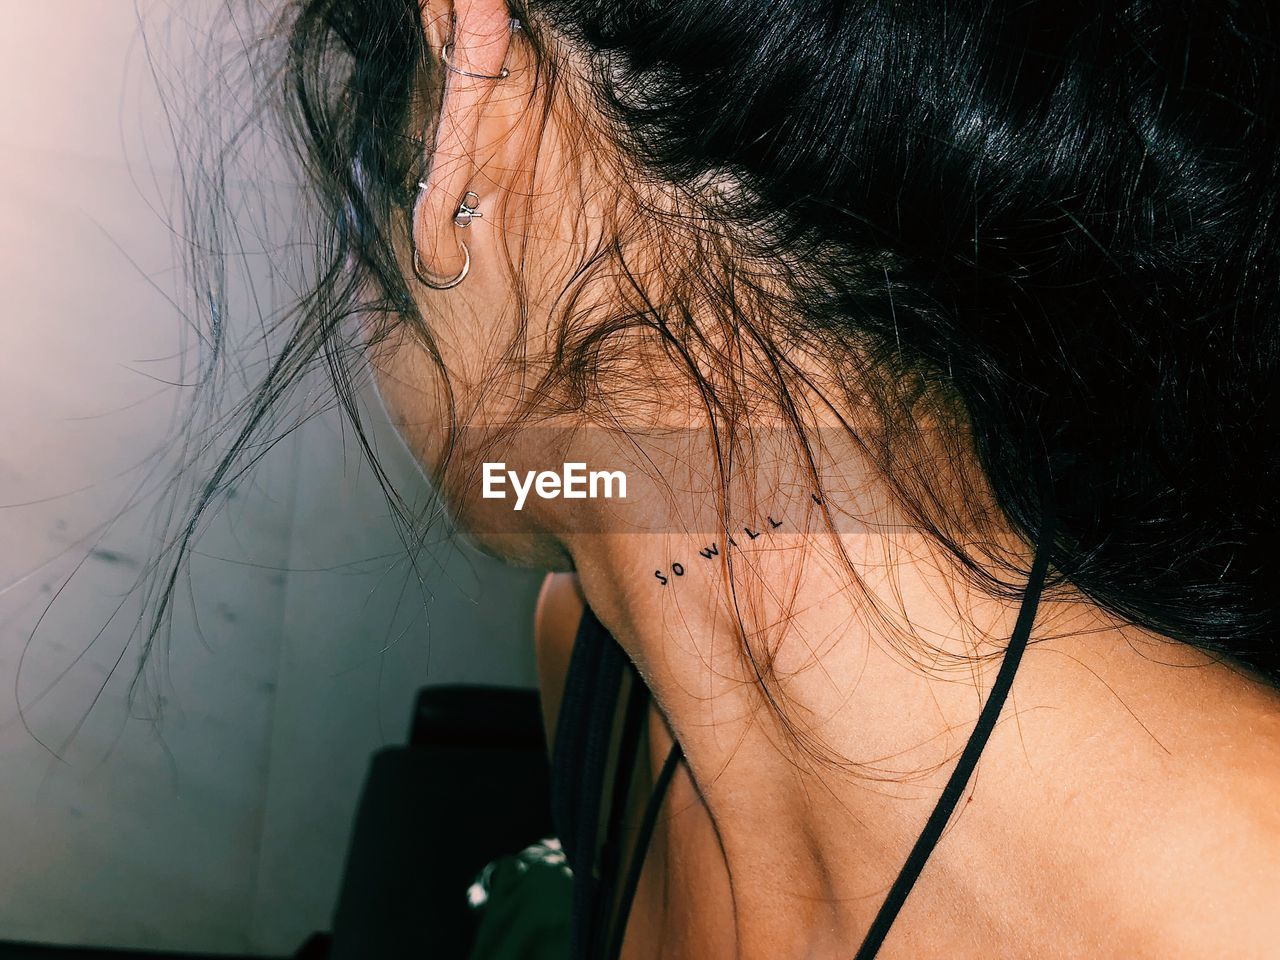 Woman showing text tattoo on her neck